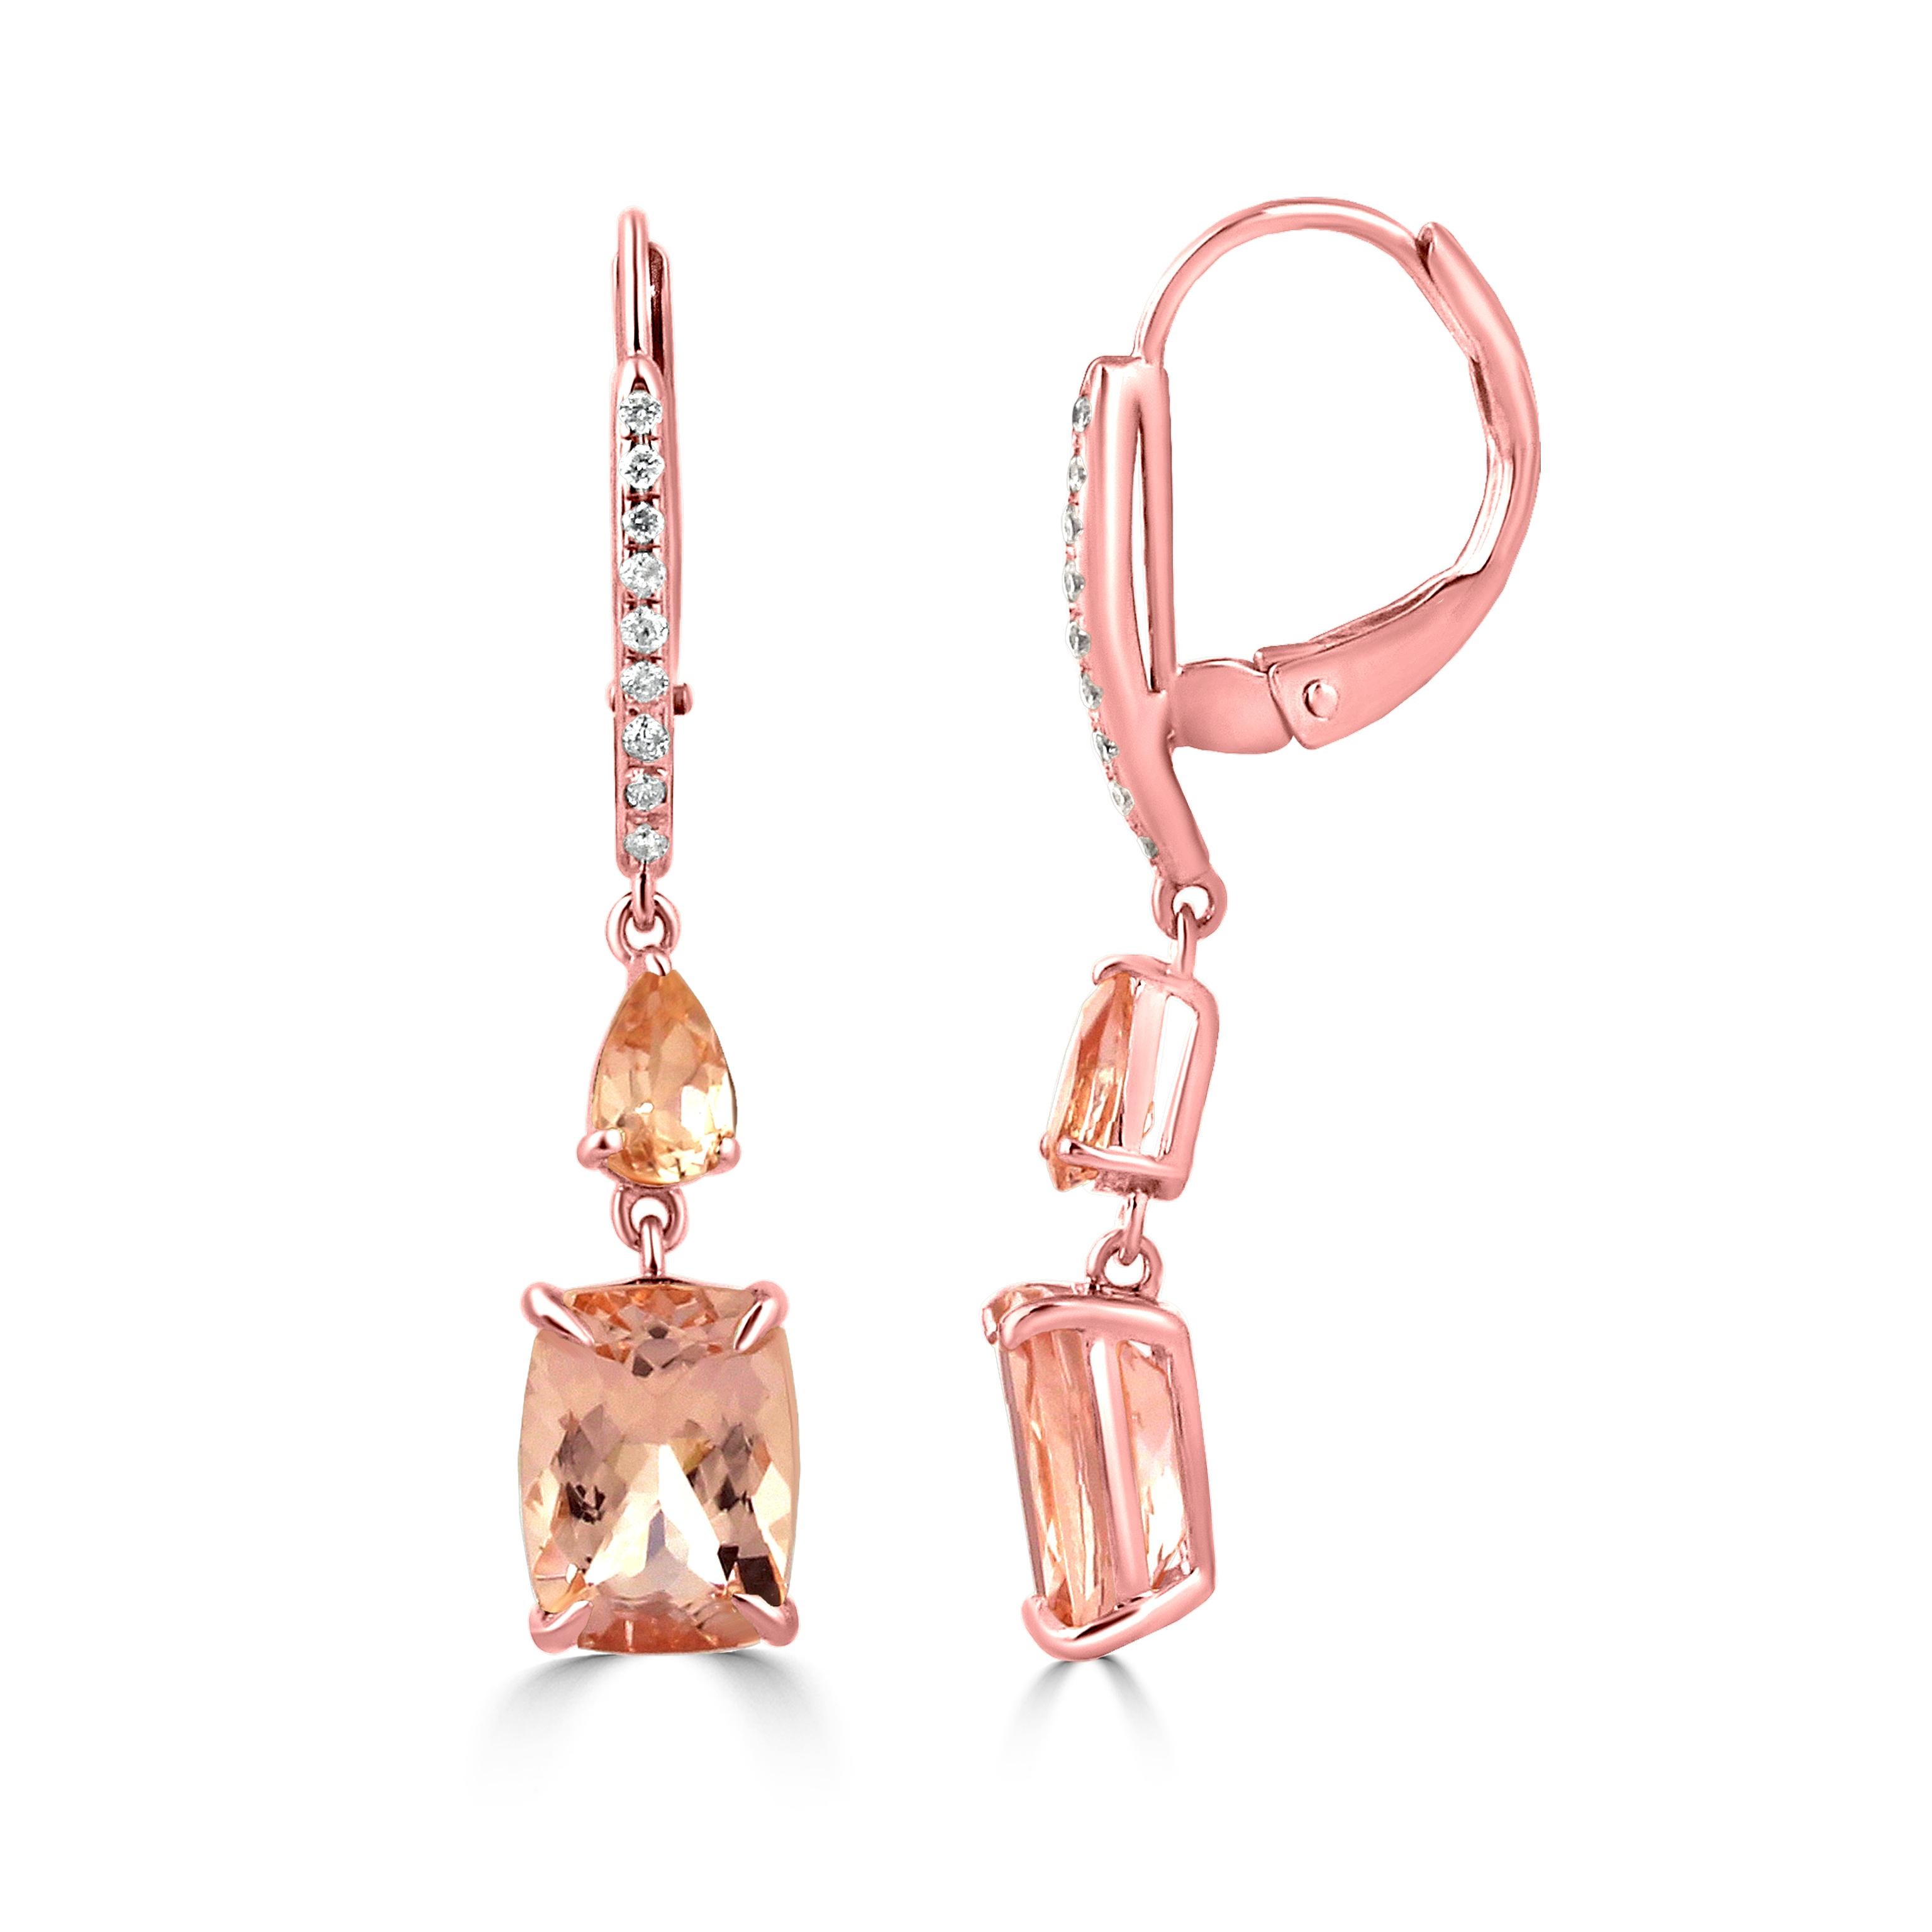 Contemporary Gemistry 2.99 Carat T.W. Cushion & Pear Morganite Leverback Drop Earrings For Sale